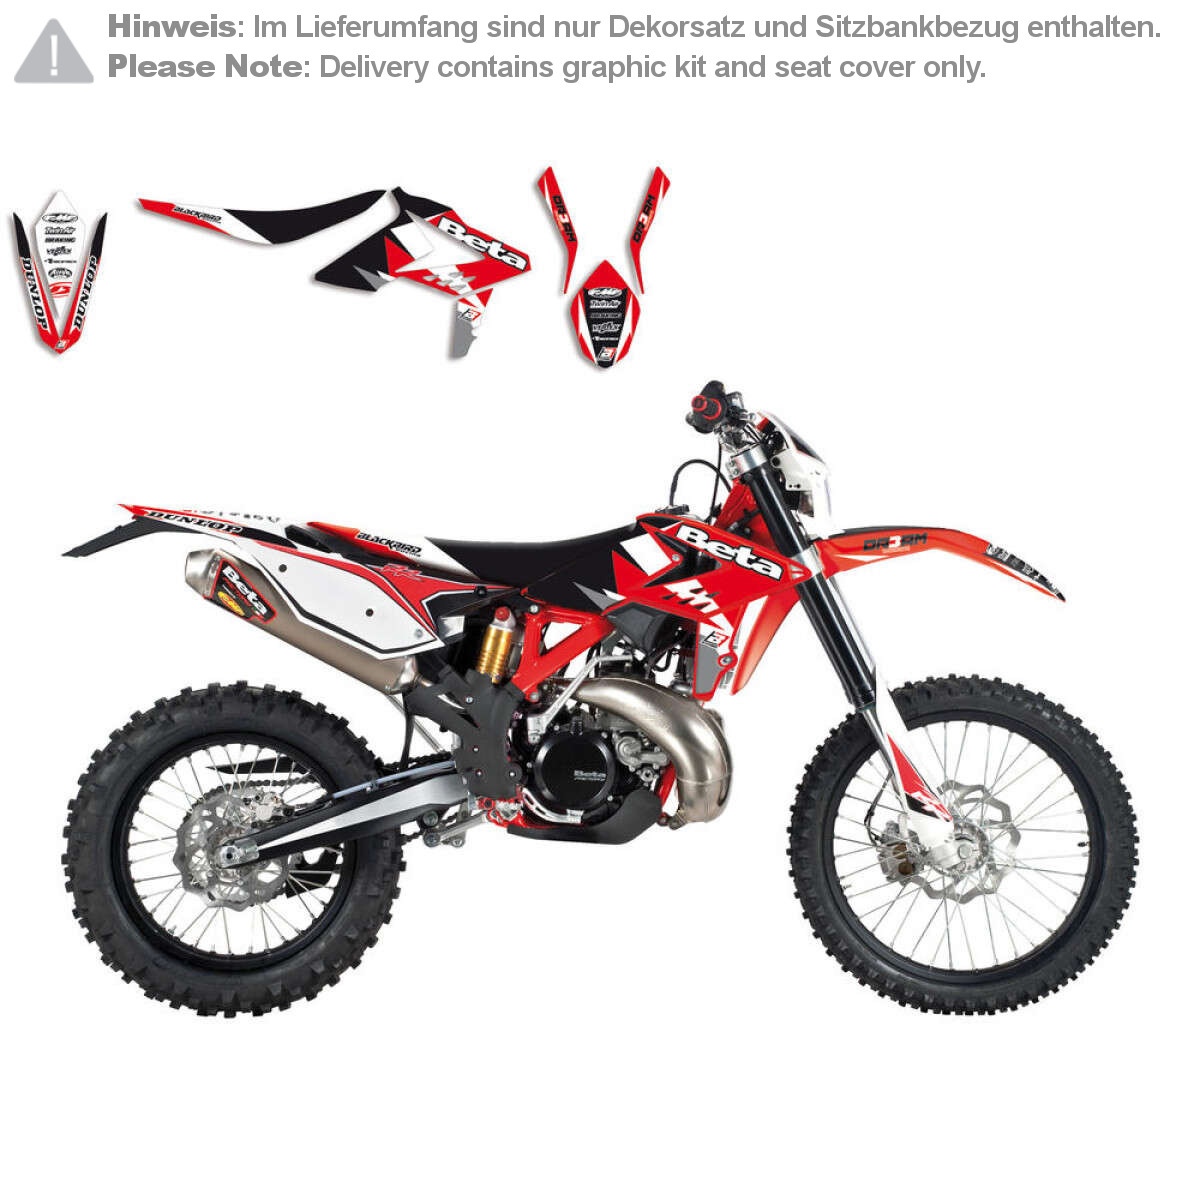 Blackbird Racing Graphic Kit with Seat Cover Dream 3 Beta RR 2T/4T 13-17, Red/Black/White